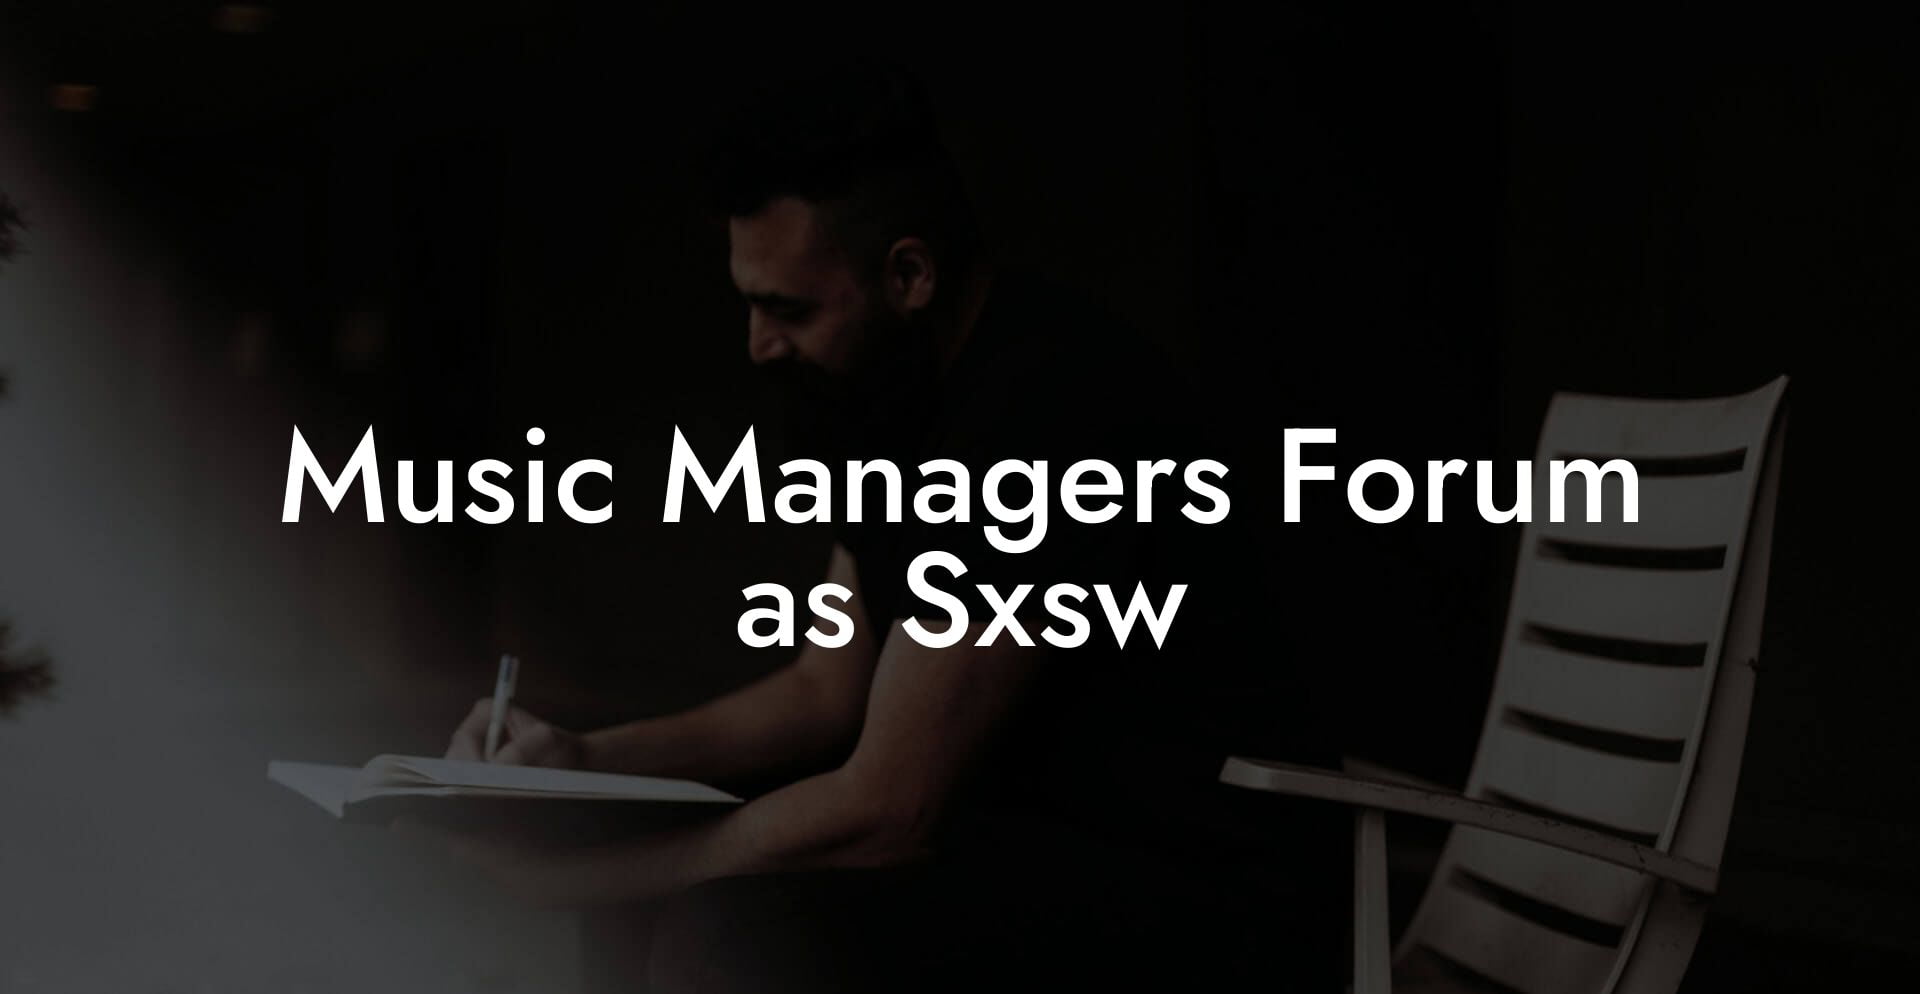 Music Managers Forum as Sxsw